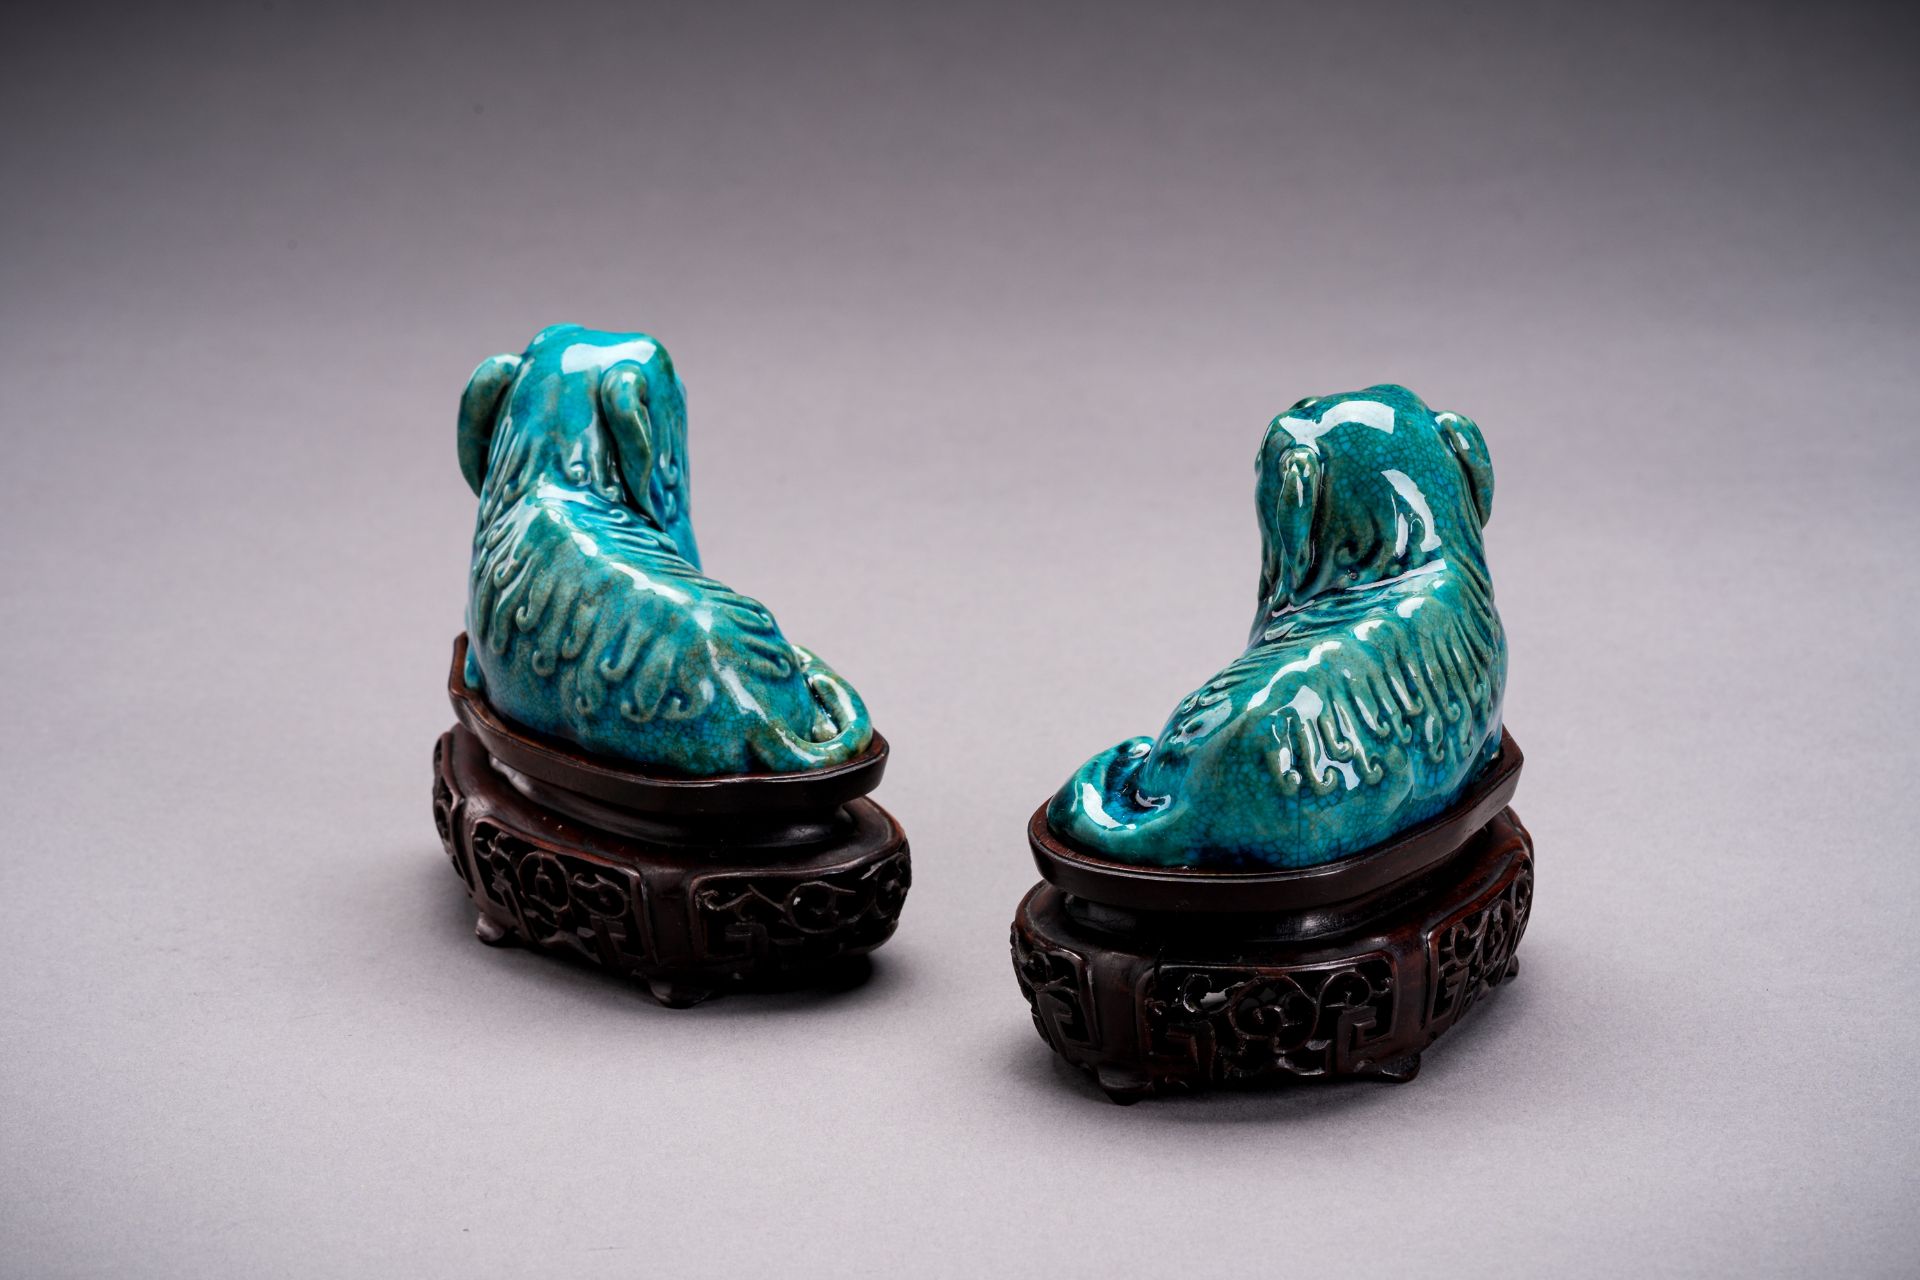 A PAIR OF TURQUOISE GLAZED PORCELAIN BUDDHIST LIONS, QING - Image 5 of 6